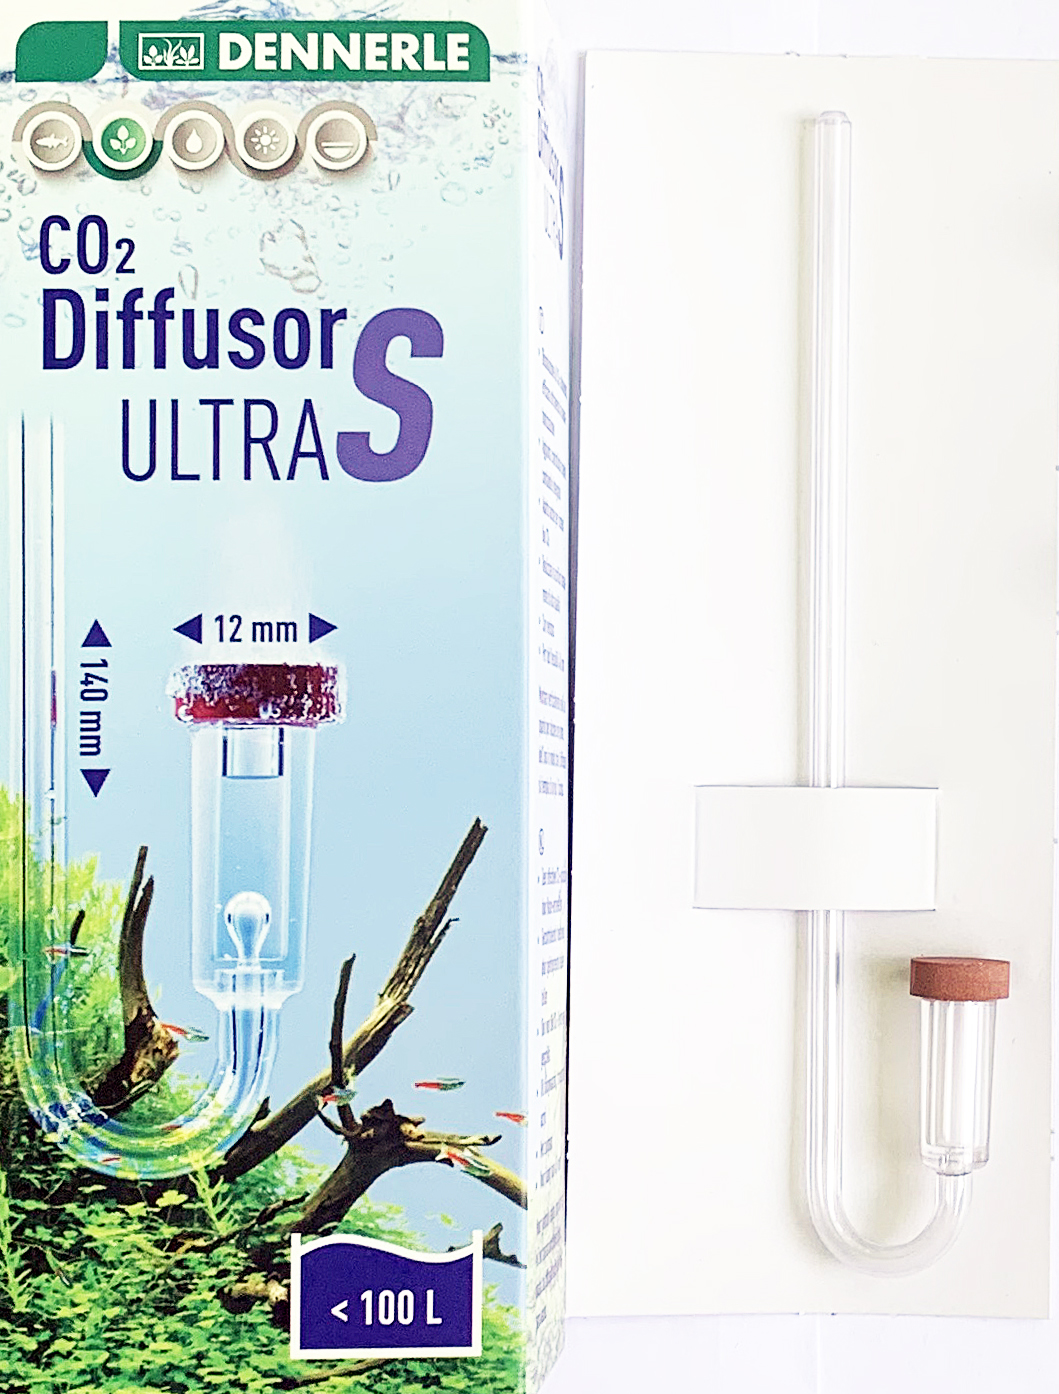 Dennerle Co2 diffusor ultra S